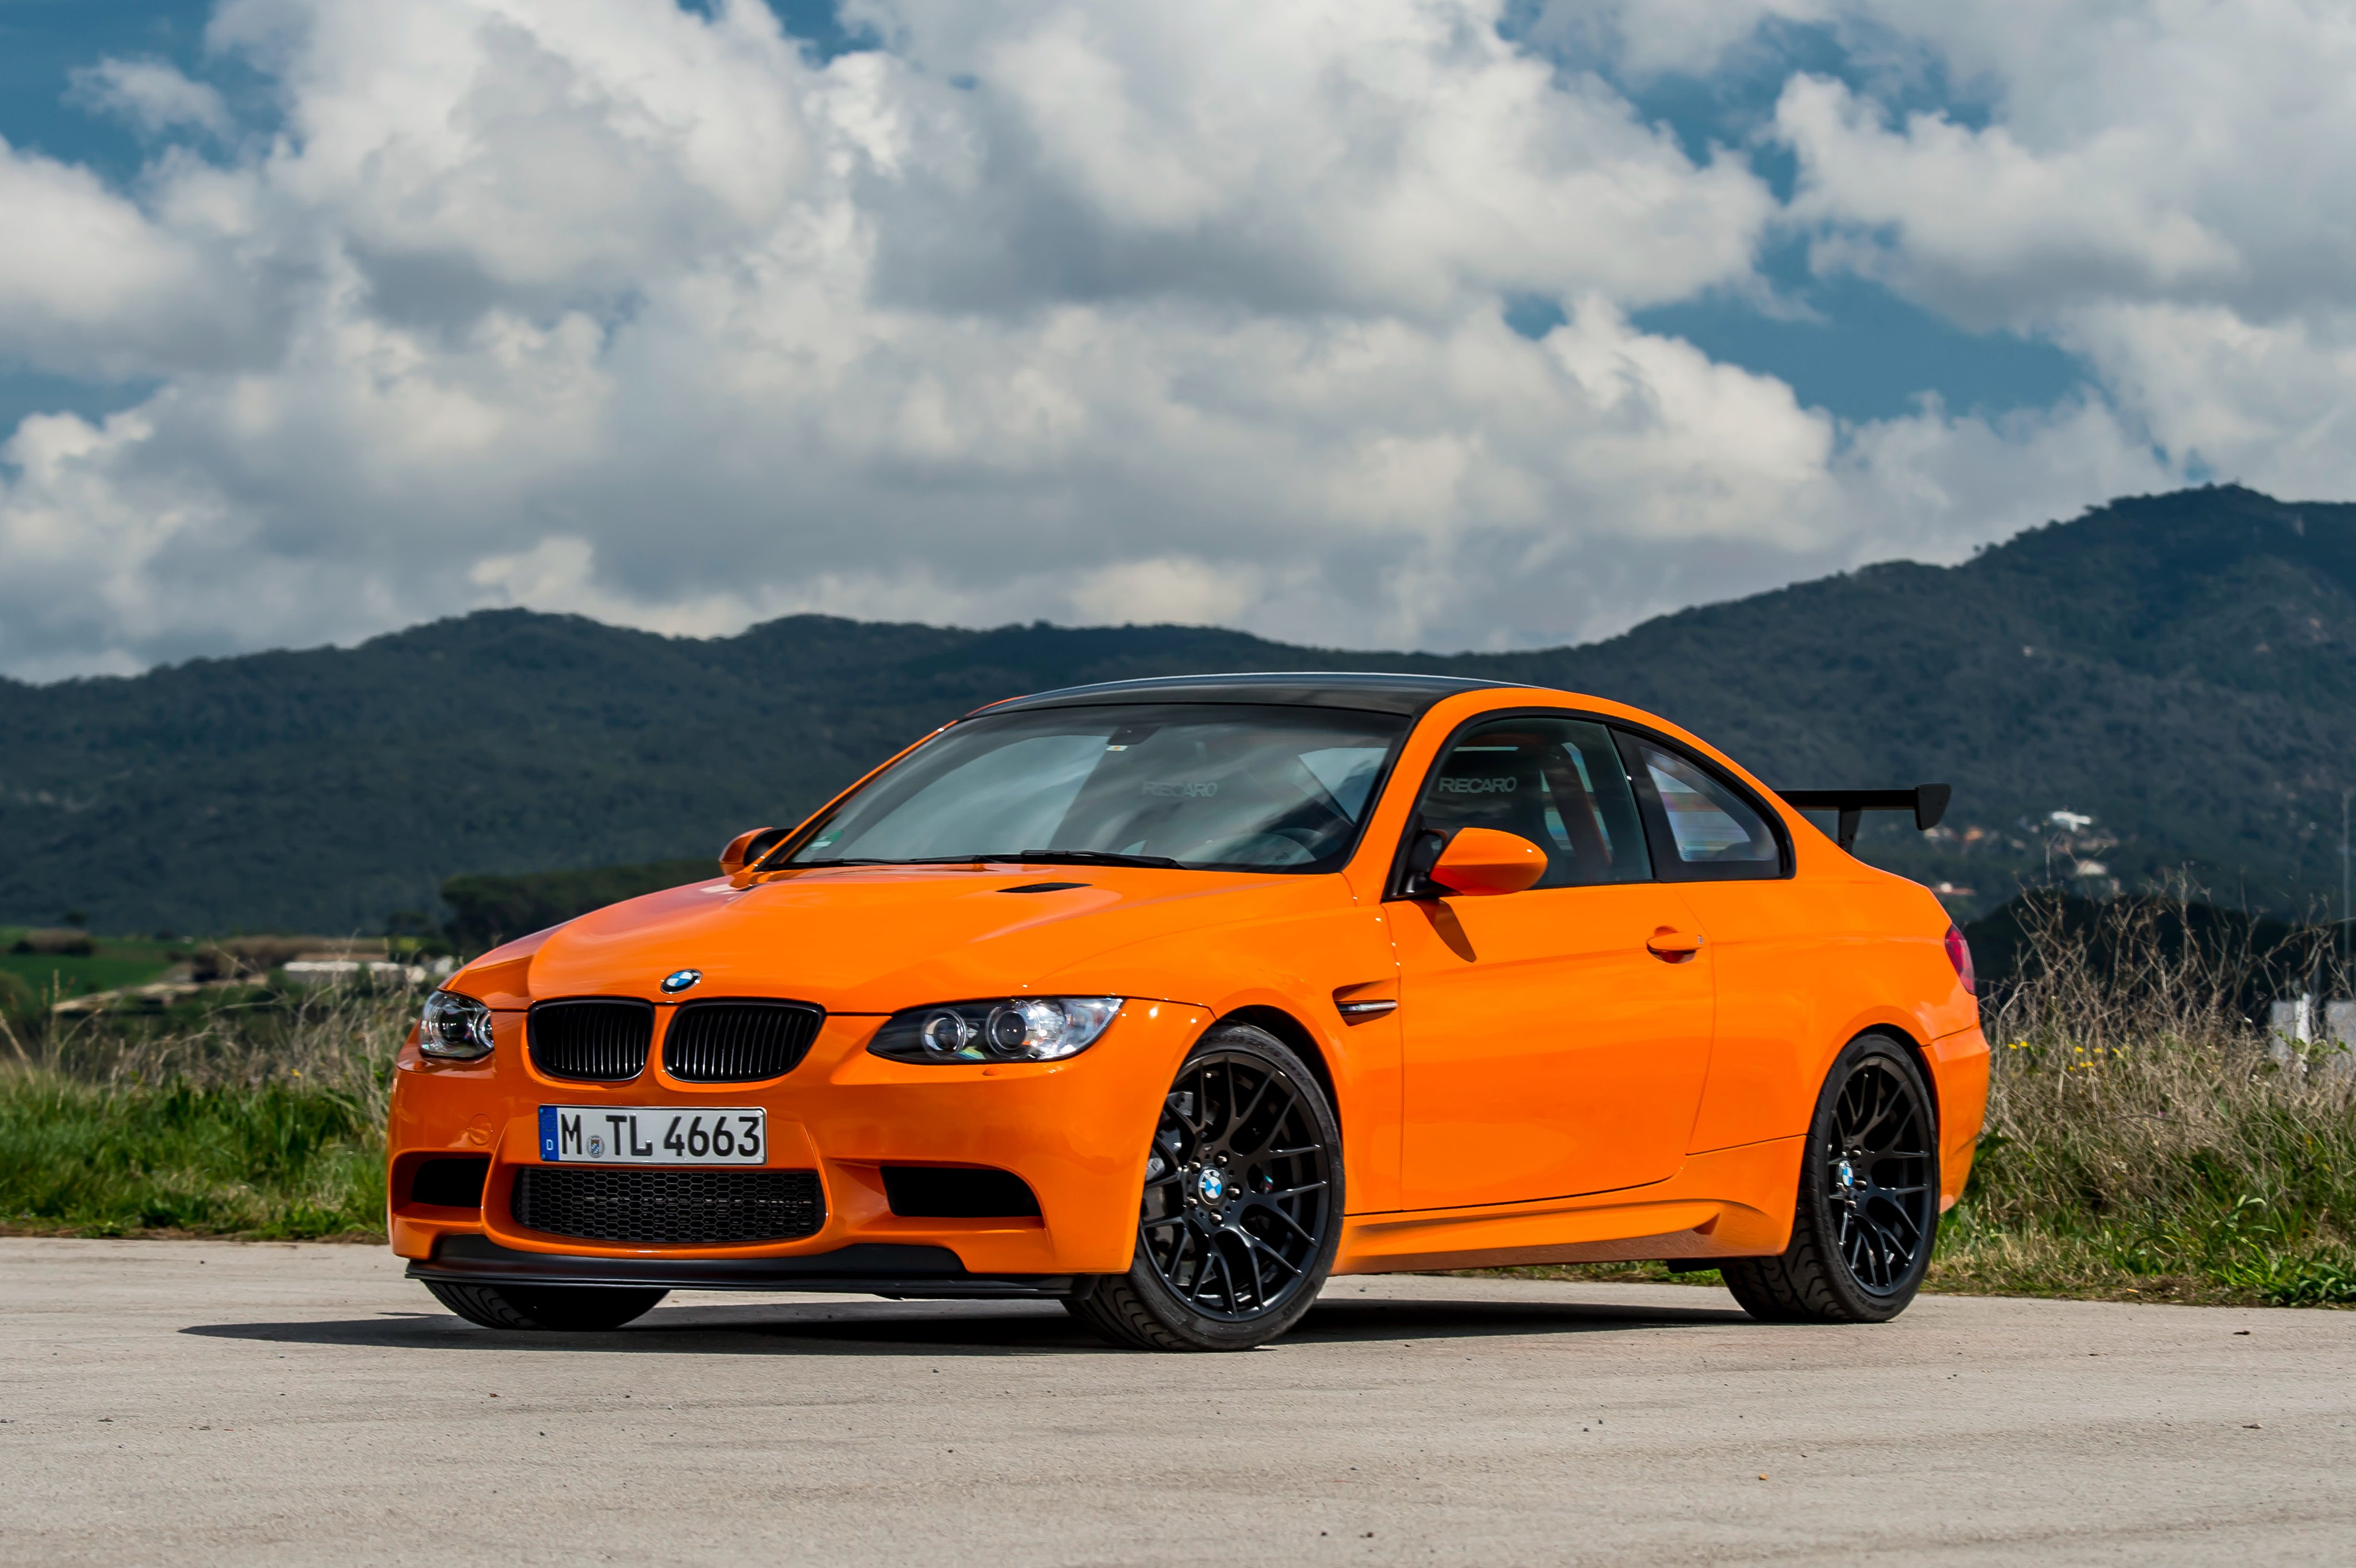 bmw, M3, Gts, 2010 Wallpapers HD / Desktop and Mobile Backgrounds